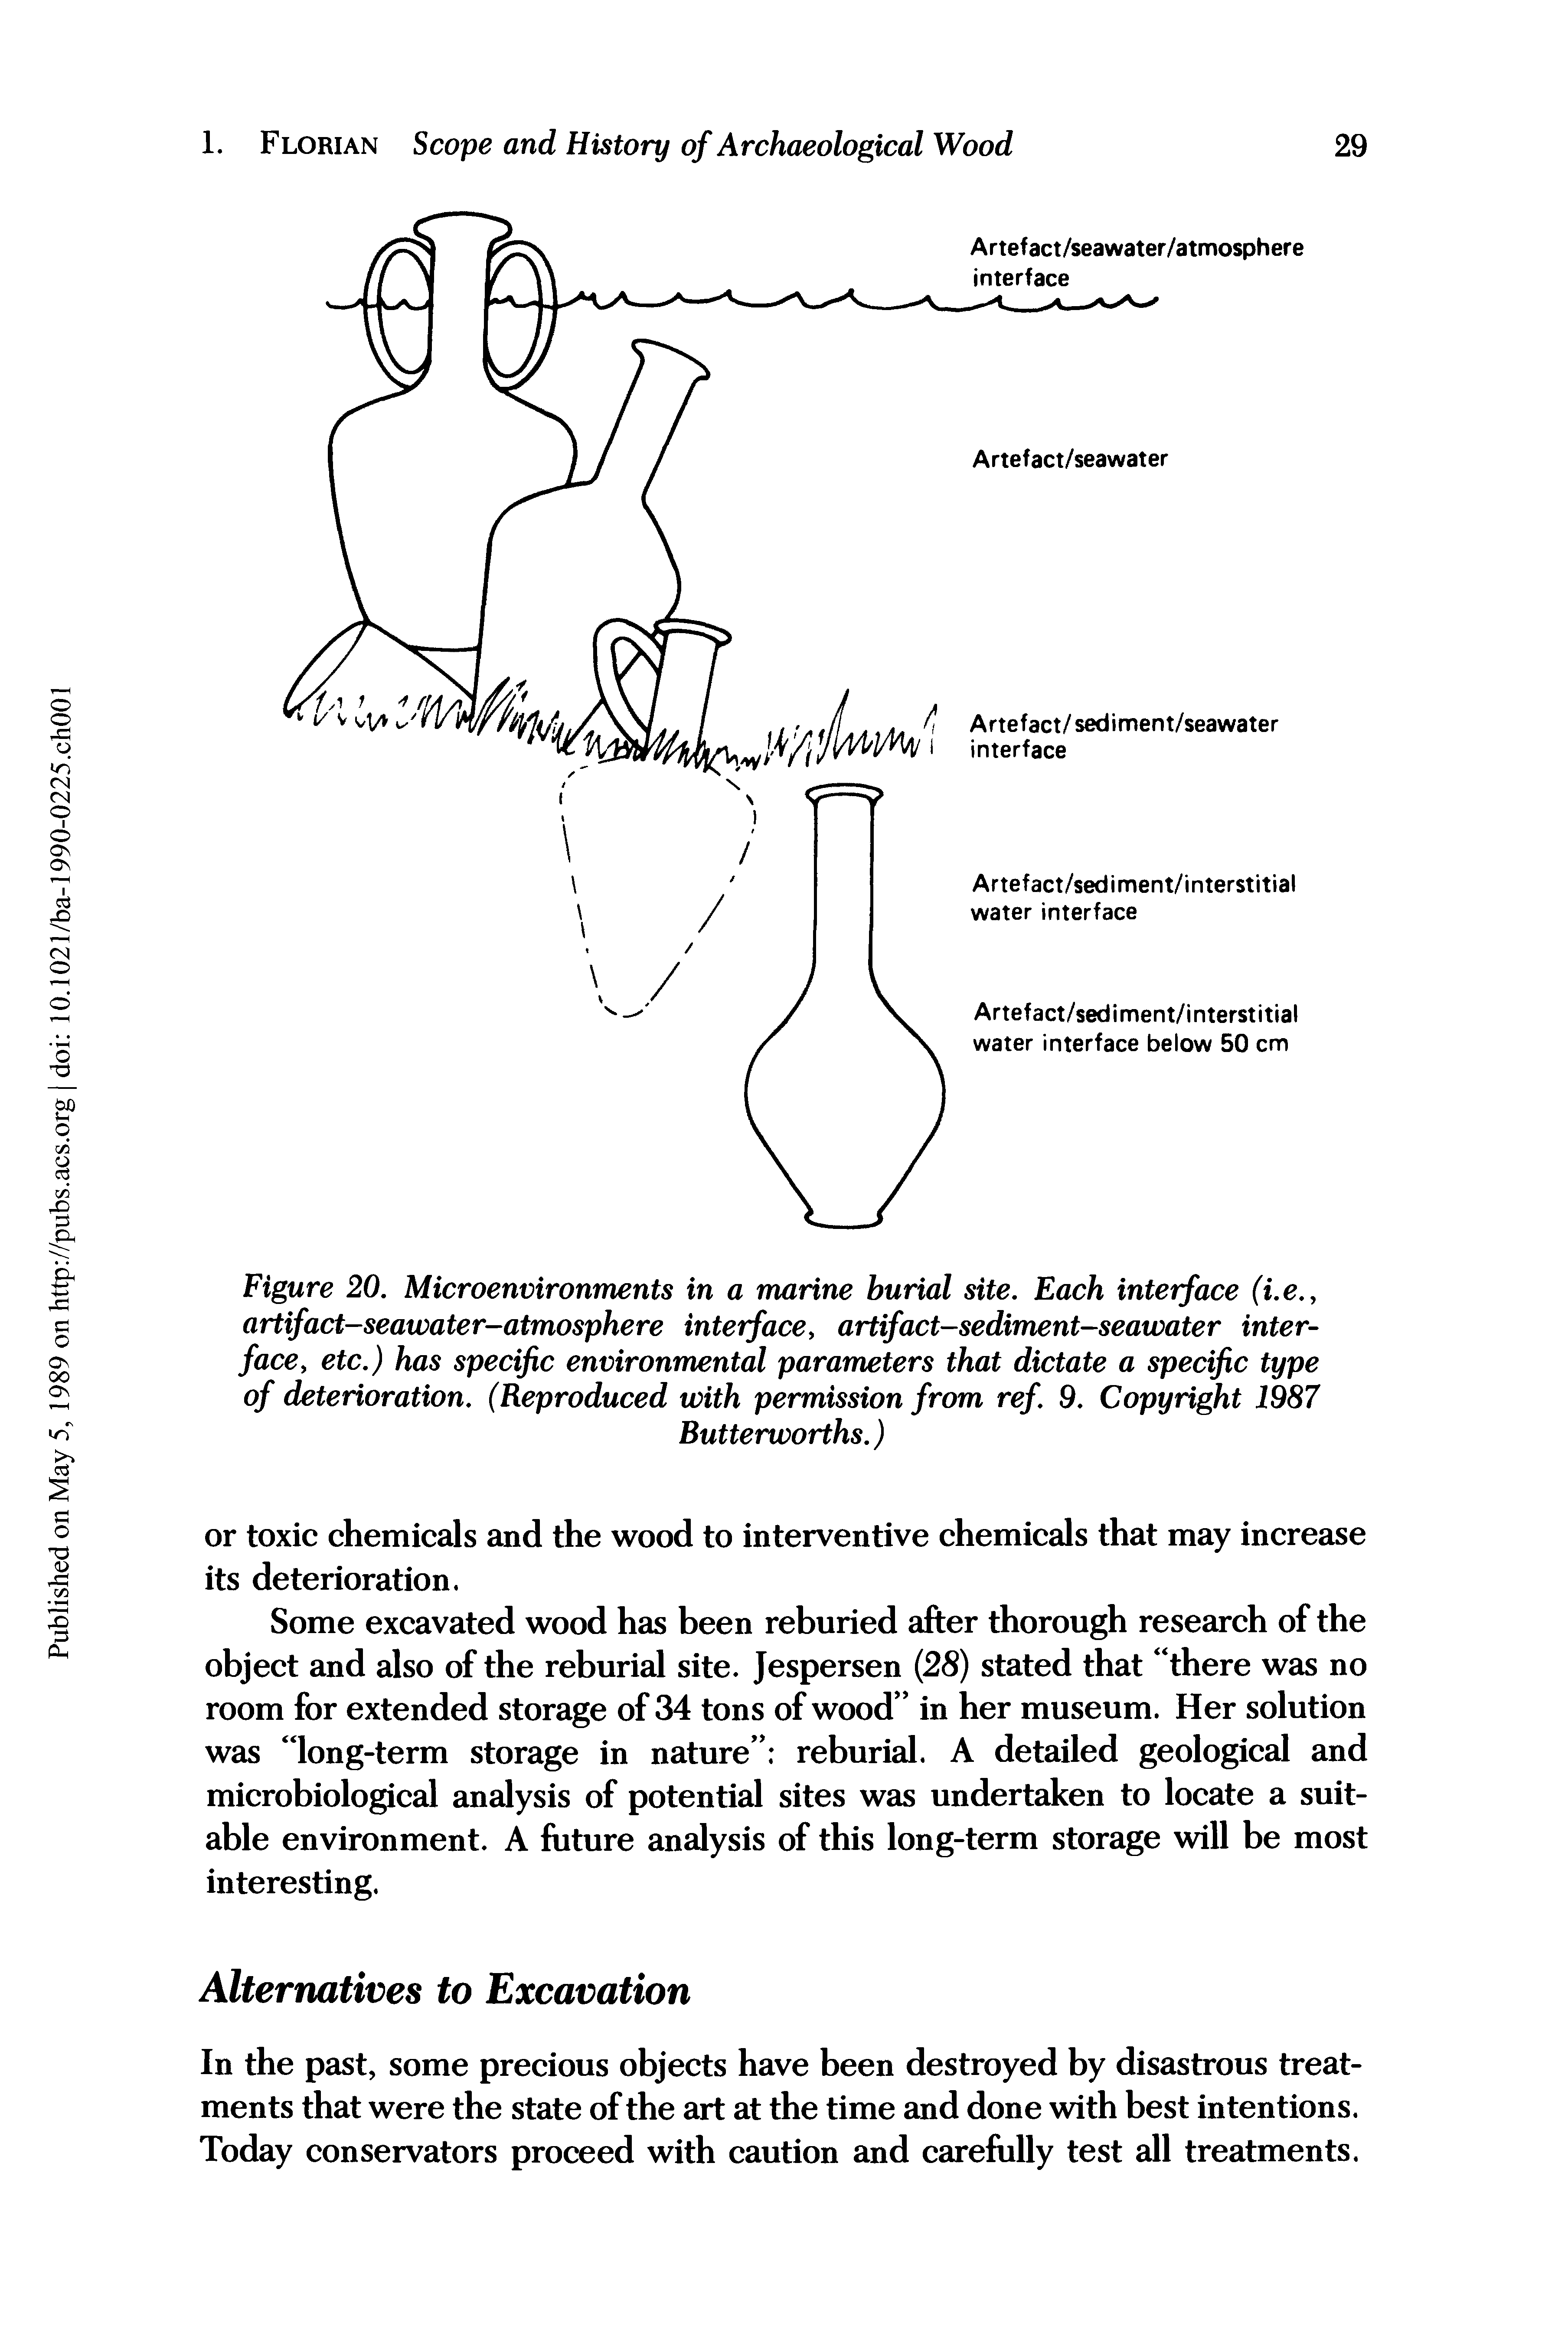 Figure 20. Microenvironments in a marine burial site. Each interface (i.e.y artifact-seawater-atmosphere interface, artifact-sediment-seawater interface, etc.) has specific environmental parameters that dictate a specific type of deterioration. (Reproduced with permission from ref. 9. Copyright 1987...